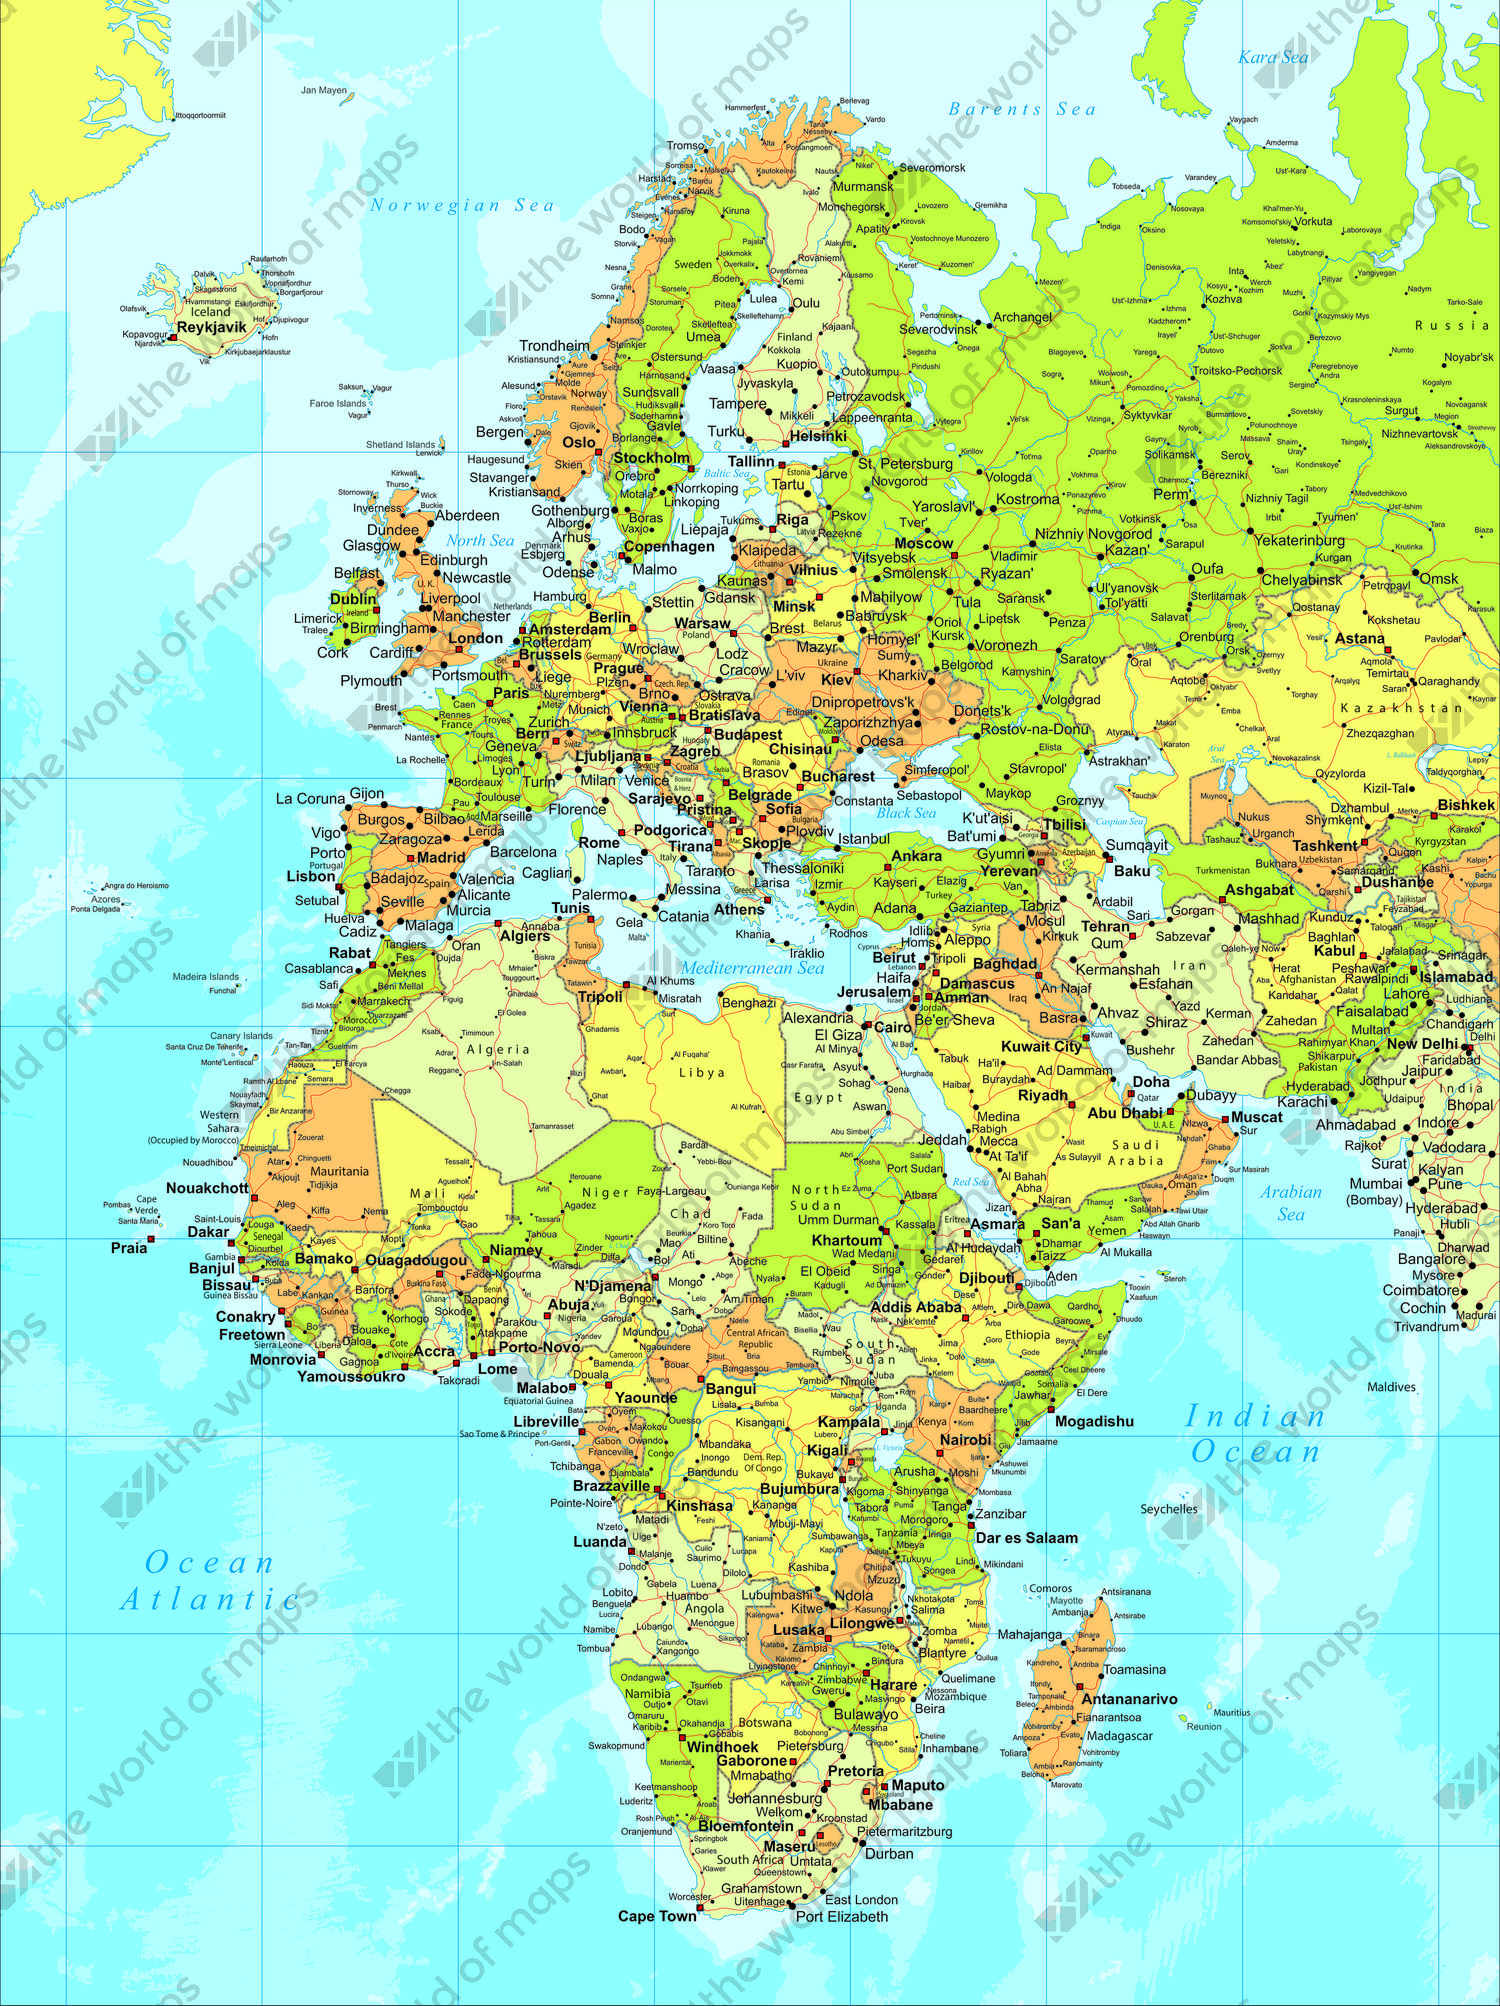  Digital map Europe, Middle East and Africa, detailed